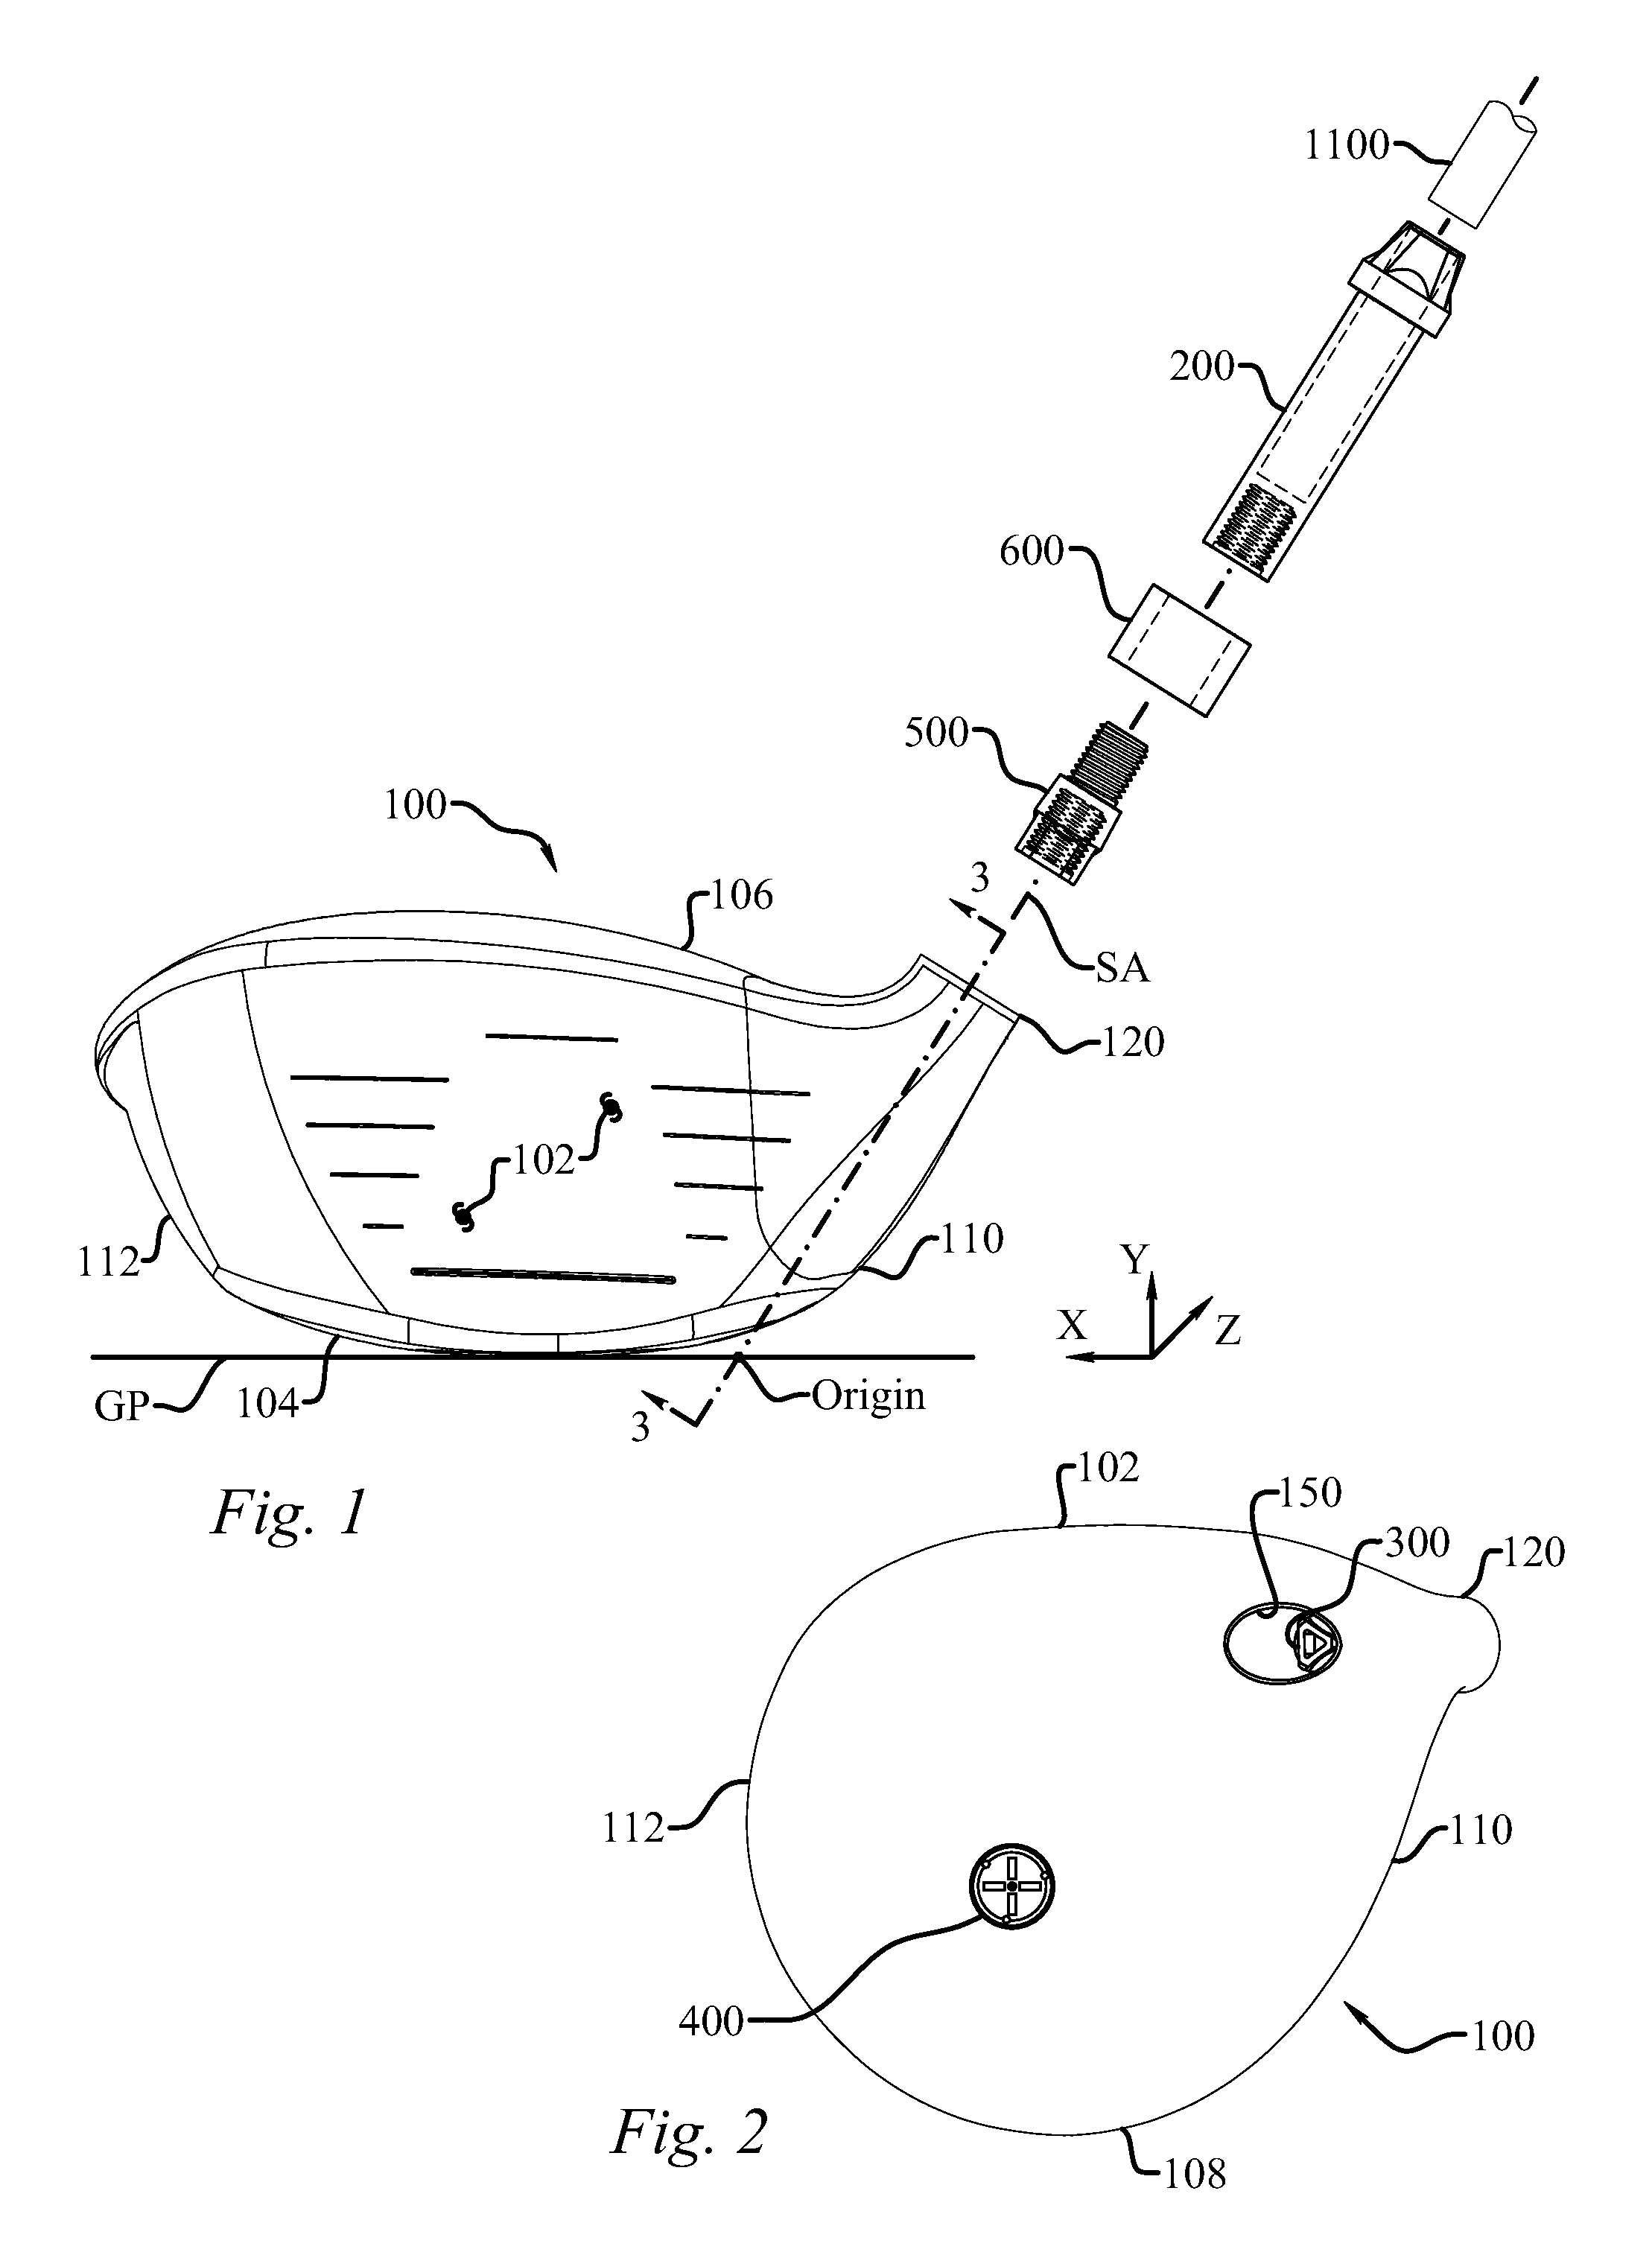 Length adjustment system for joining a golf club head to a shaft